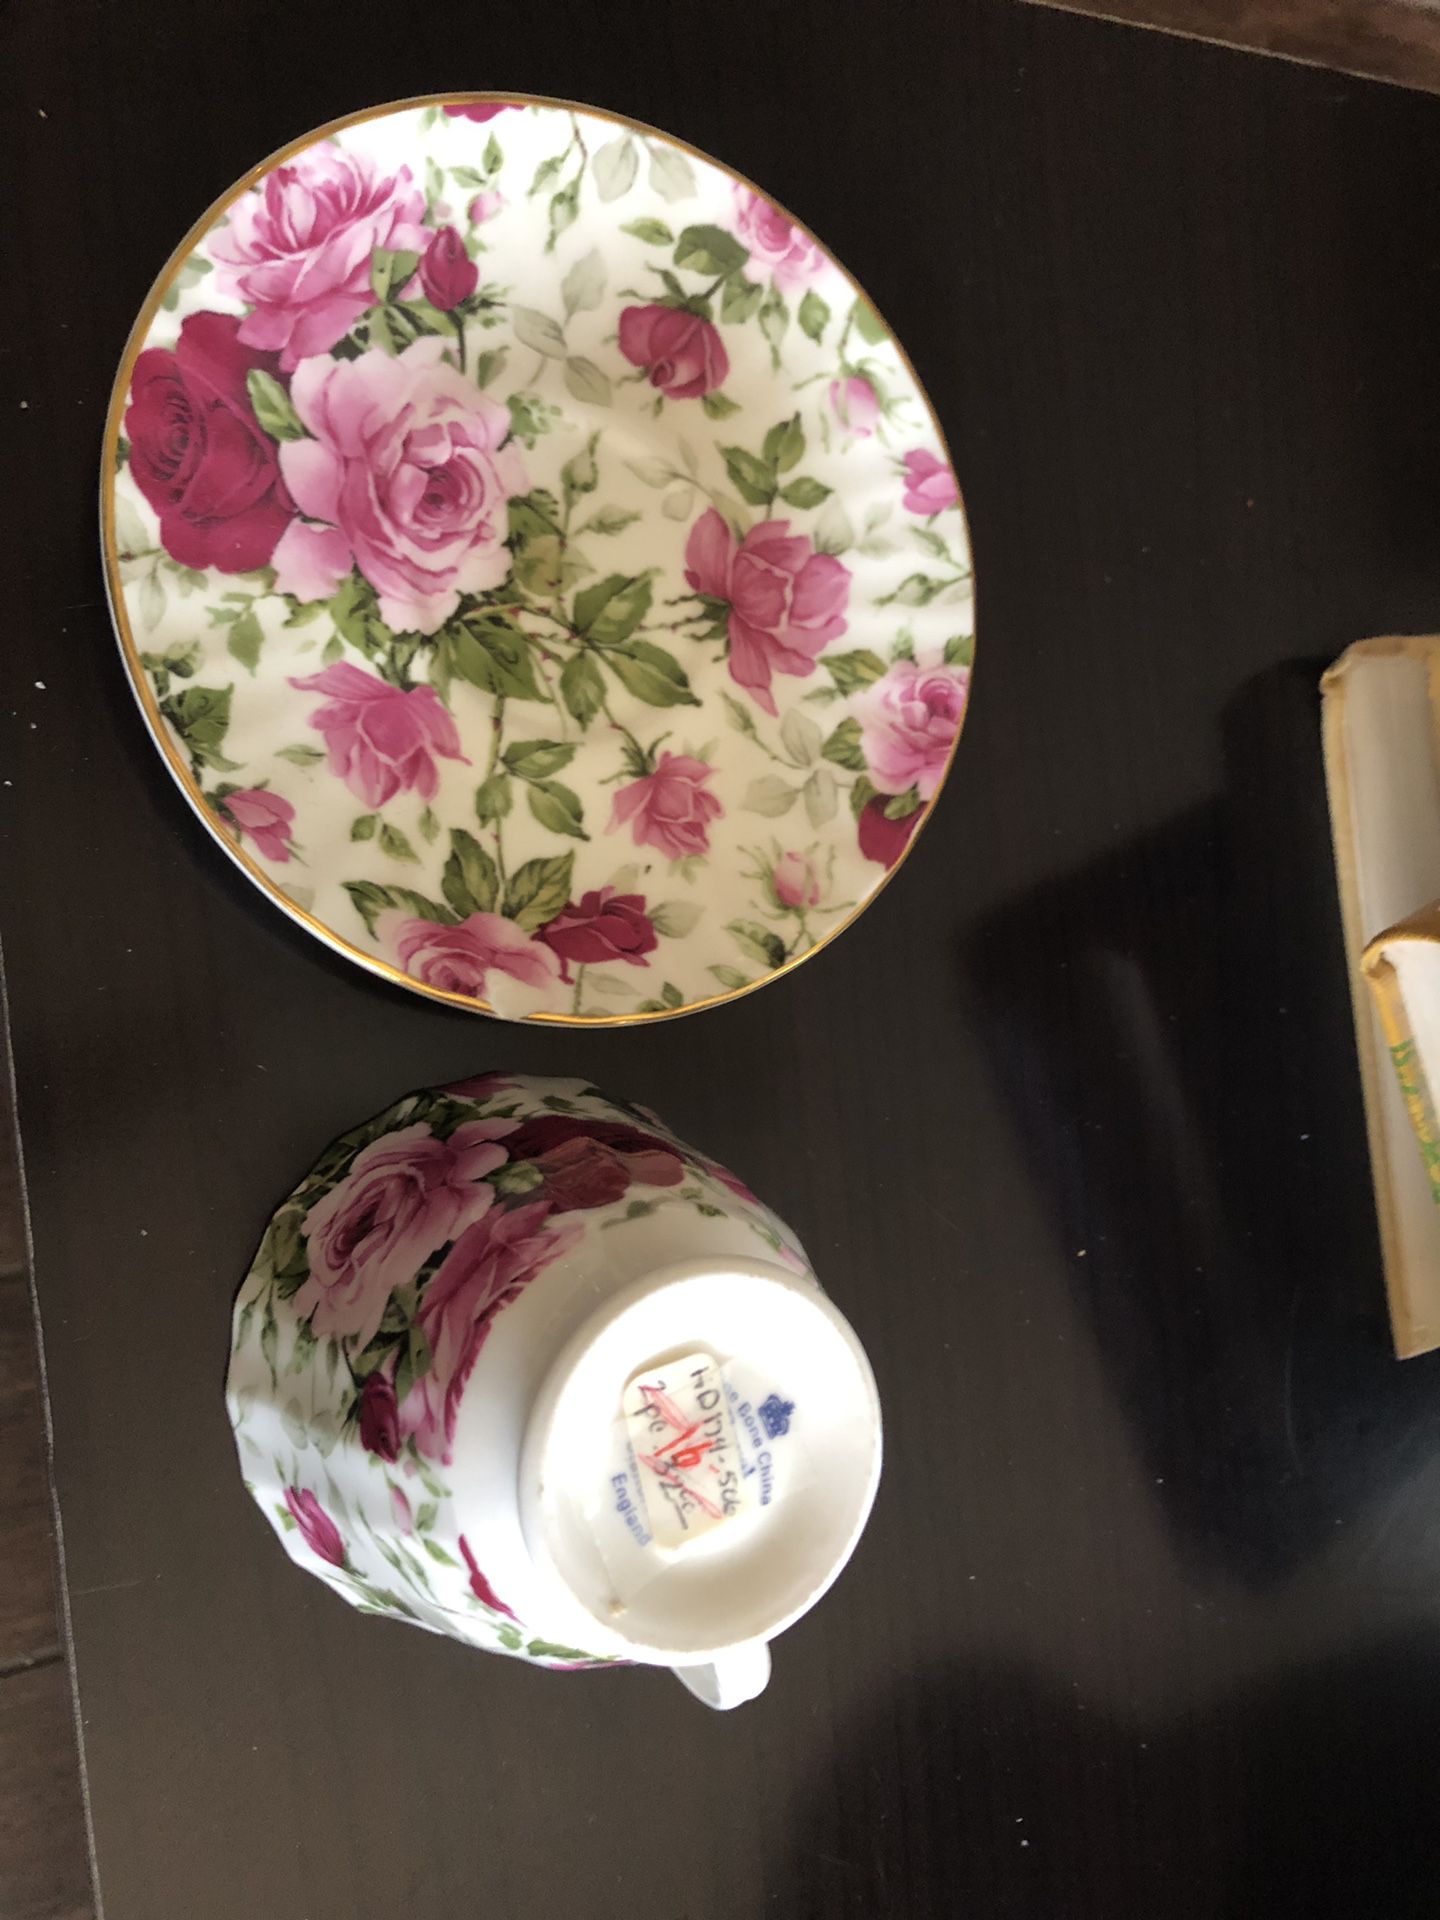 Fine bone China Royal patrician cup and saucer